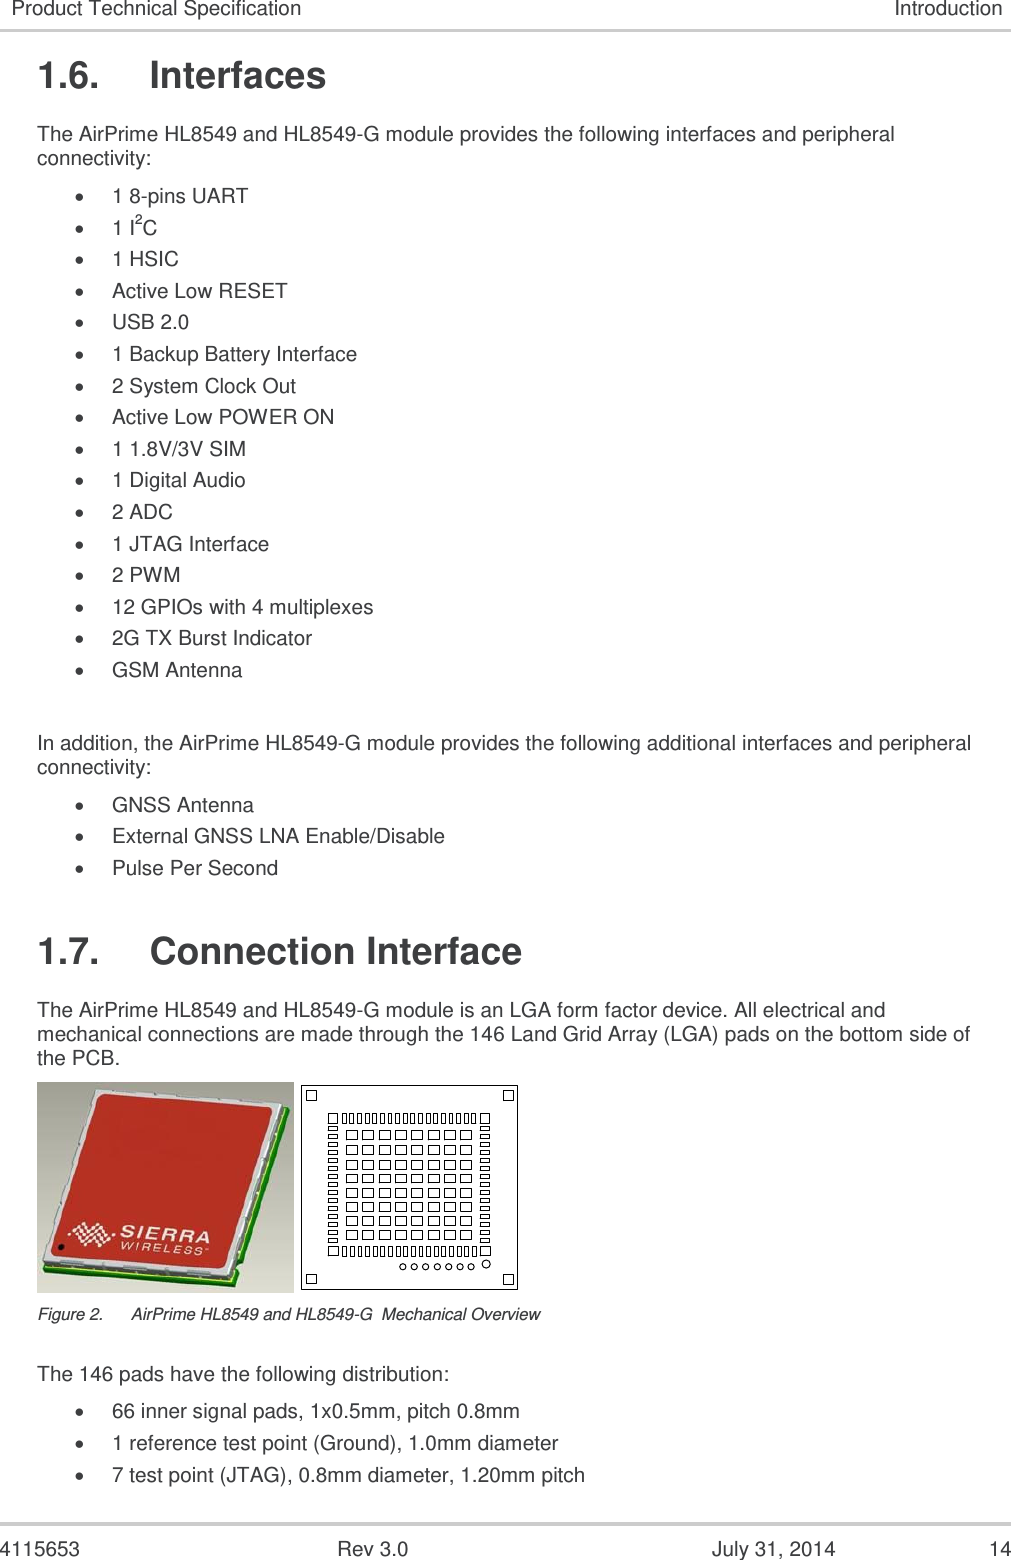  4115653  Rev 3.0  July 31, 2014  14 Product Technical Specification Introduction 1.6.  Interfaces The AirPrime HL8549 and HL8549-G module provides the following interfaces and peripheral connectivity:  1 8-pins UART  1 I2C  1 HSIC   Active Low RESET   USB 2.0  1 Backup Battery Interface  2 System Clock Out  Active Low POWER ON   1 1.8V/3V SIM   1 Digital Audio  2 ADC  1 JTAG Interface  2 PWM  12 GPIOs with 4 multiplexes  2G TX Burst Indicator  GSM Antenna  In addition, the AirPrime HL8549-G module provides the following additional interfaces and peripheral connectivity:  GNSS Antenna  External GNSS LNA Enable/Disable  Pulse Per Second 1.7.  Connection Interface The AirPrime HL8549 and HL8549-G module is an LGA form factor device. All electrical and mechanical connections are made through the 146 Land Grid Array (LGA) pads on the bottom side of the PCB.    Figure 2.  AirPrime HL8549 and HL8549-G  Mechanical Overview The 146 pads have the following distribution:  66 inner signal pads, 1x0.5mm, pitch 0.8mm  1 reference test point (Ground), 1.0mm diameter  7 test point (JTAG), 0.8mm diameter, 1.20mm pitch 